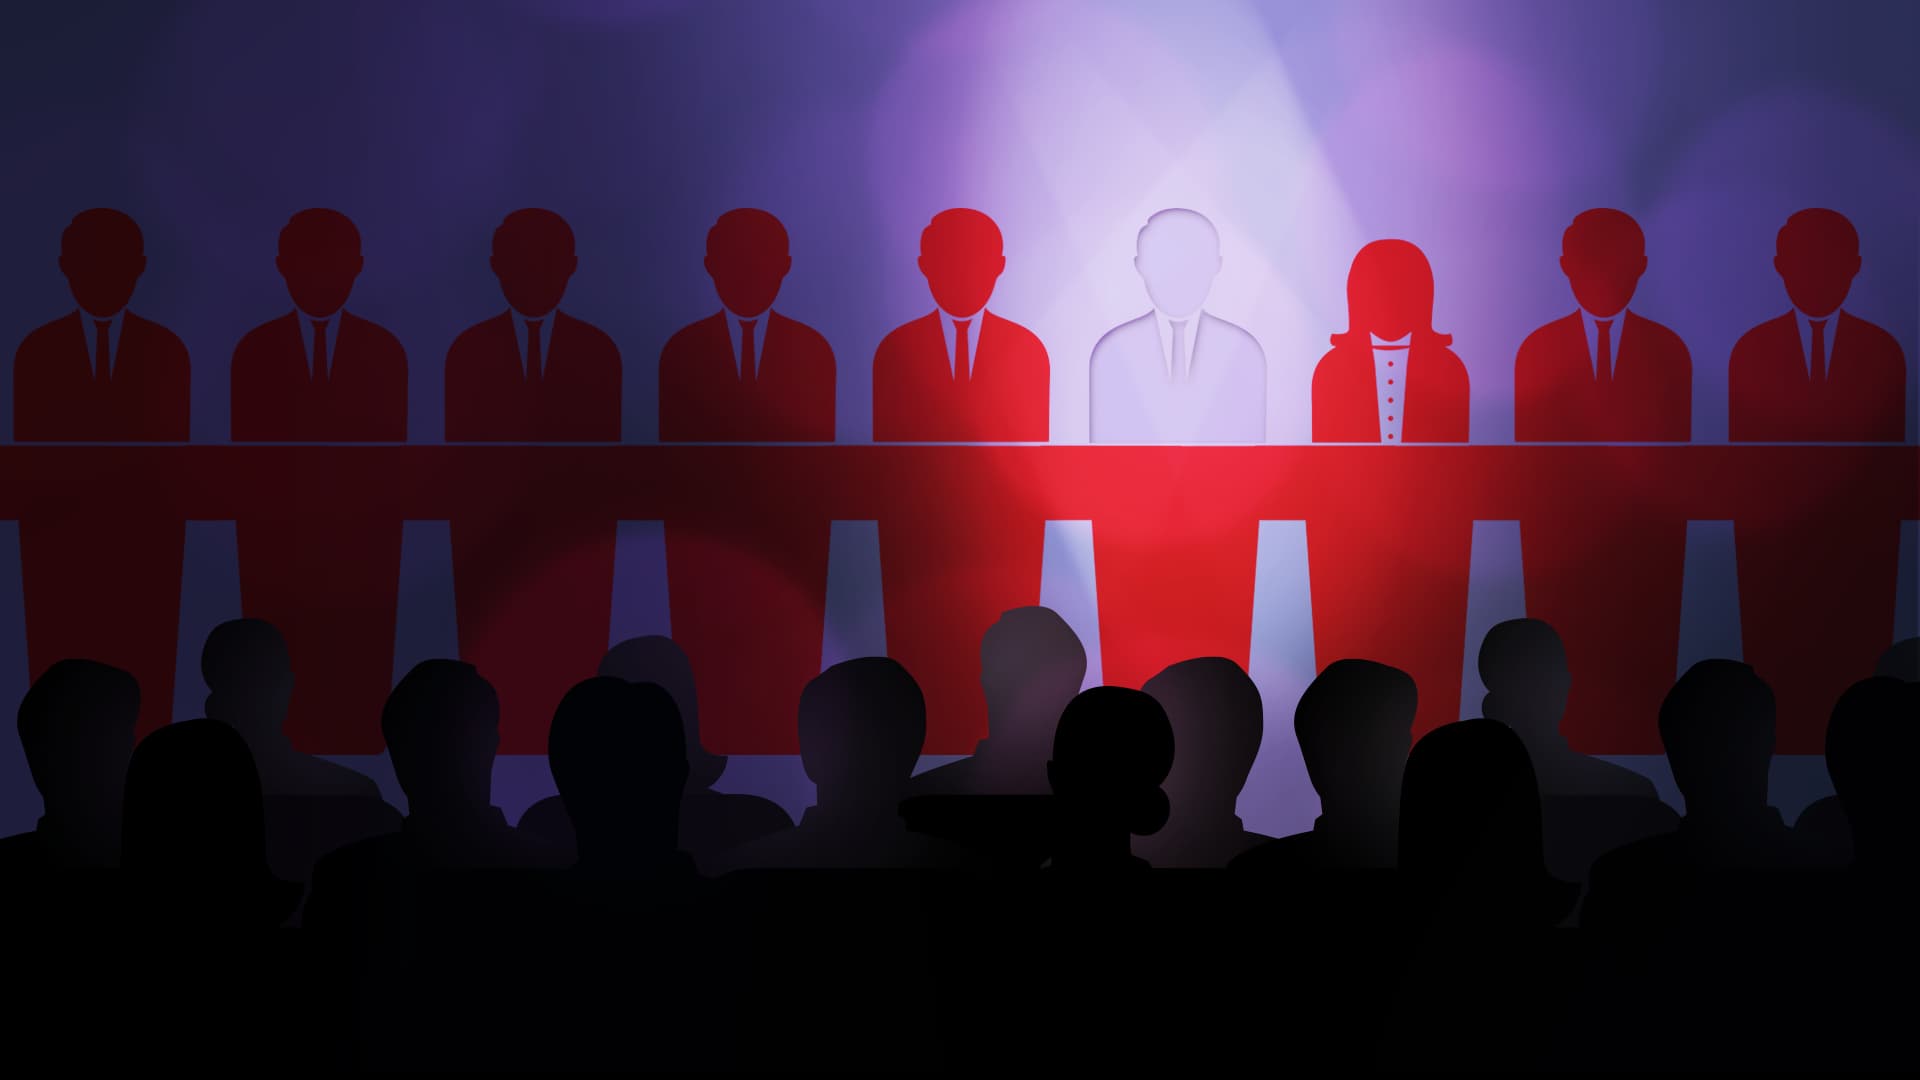 8 red silhouettes at podiums with one empty podium